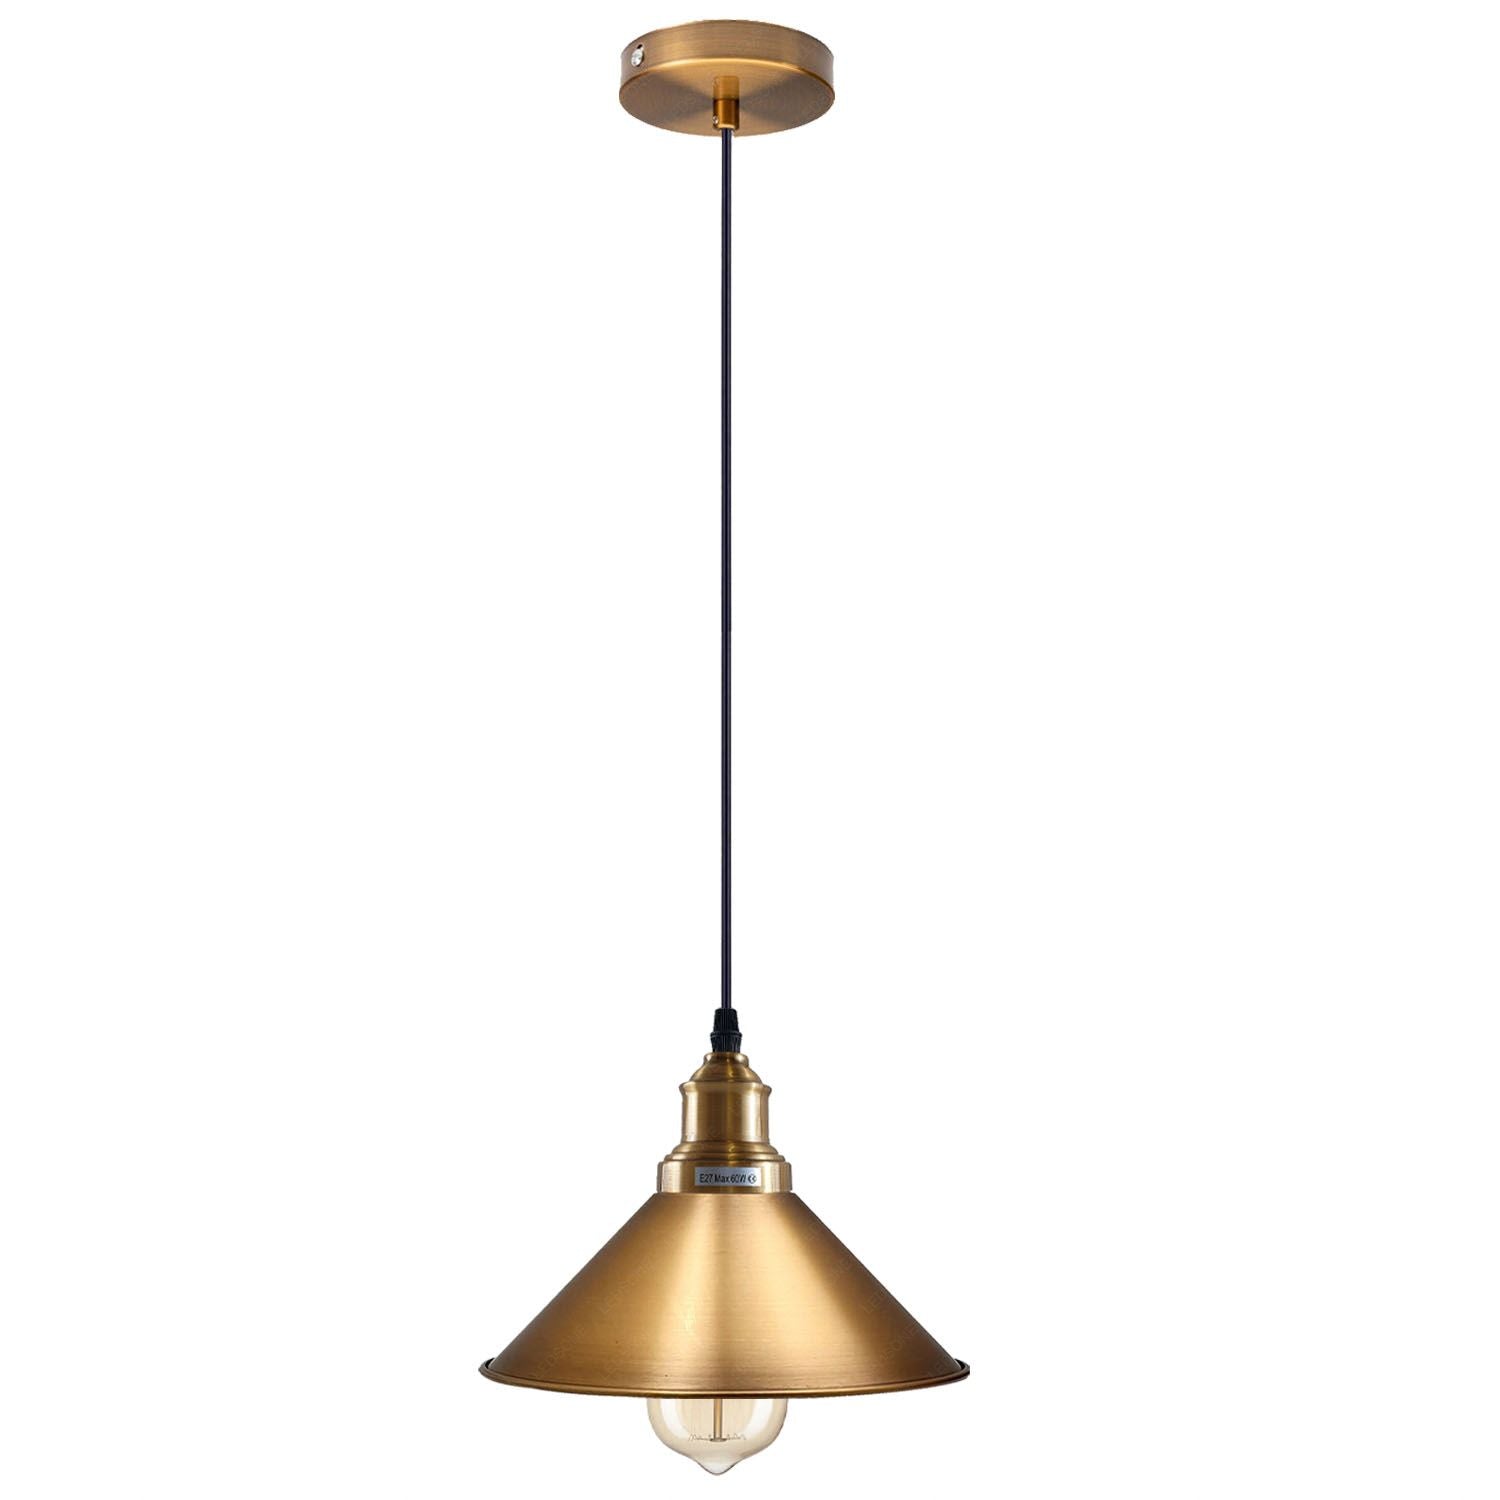 Vintage Pendant Ceiling Lighting Fixture with Metal cone Lampshade, E27, Hanging Lights, Ceiling Lamps for Kitchen, Hallway, Lantern, Dining Room, Bedroom, restaurant